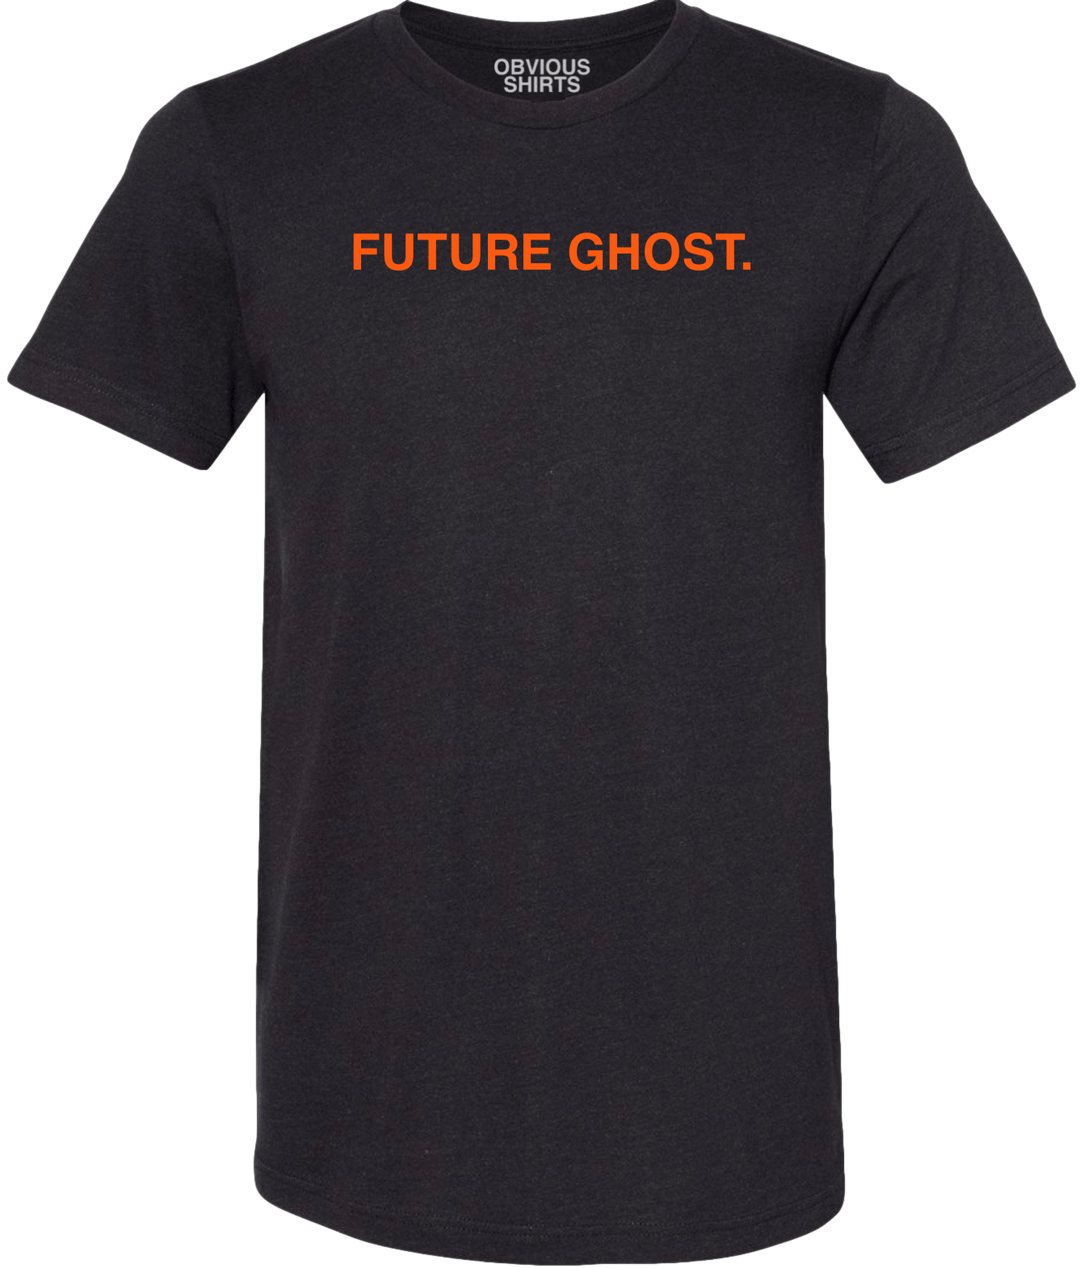 FUTURE GHOST. - OBVIOUS SHIRTS